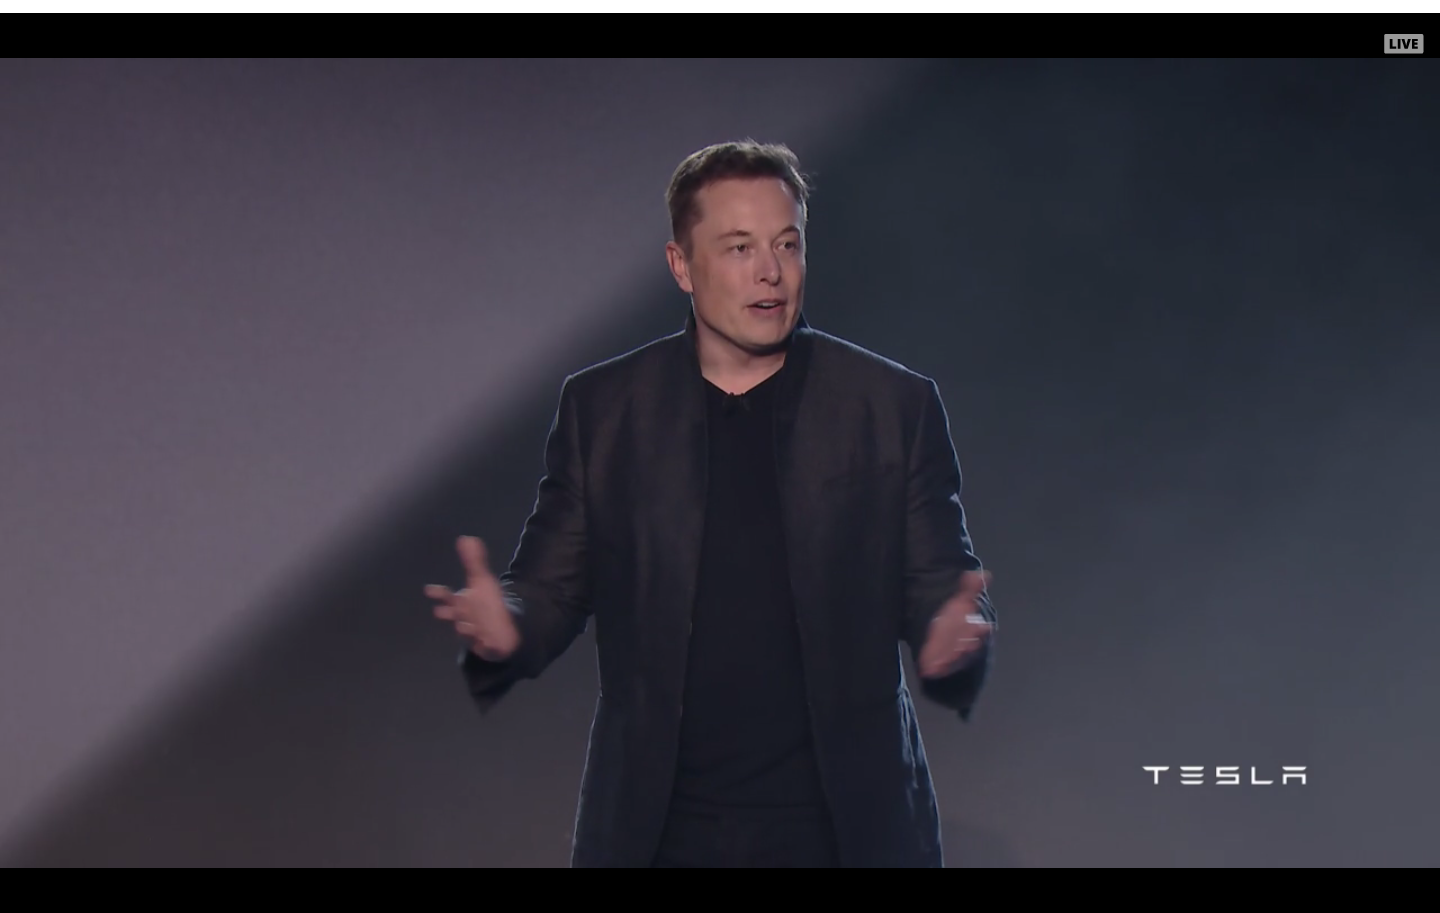 Elon Musk is a funny and brave man.